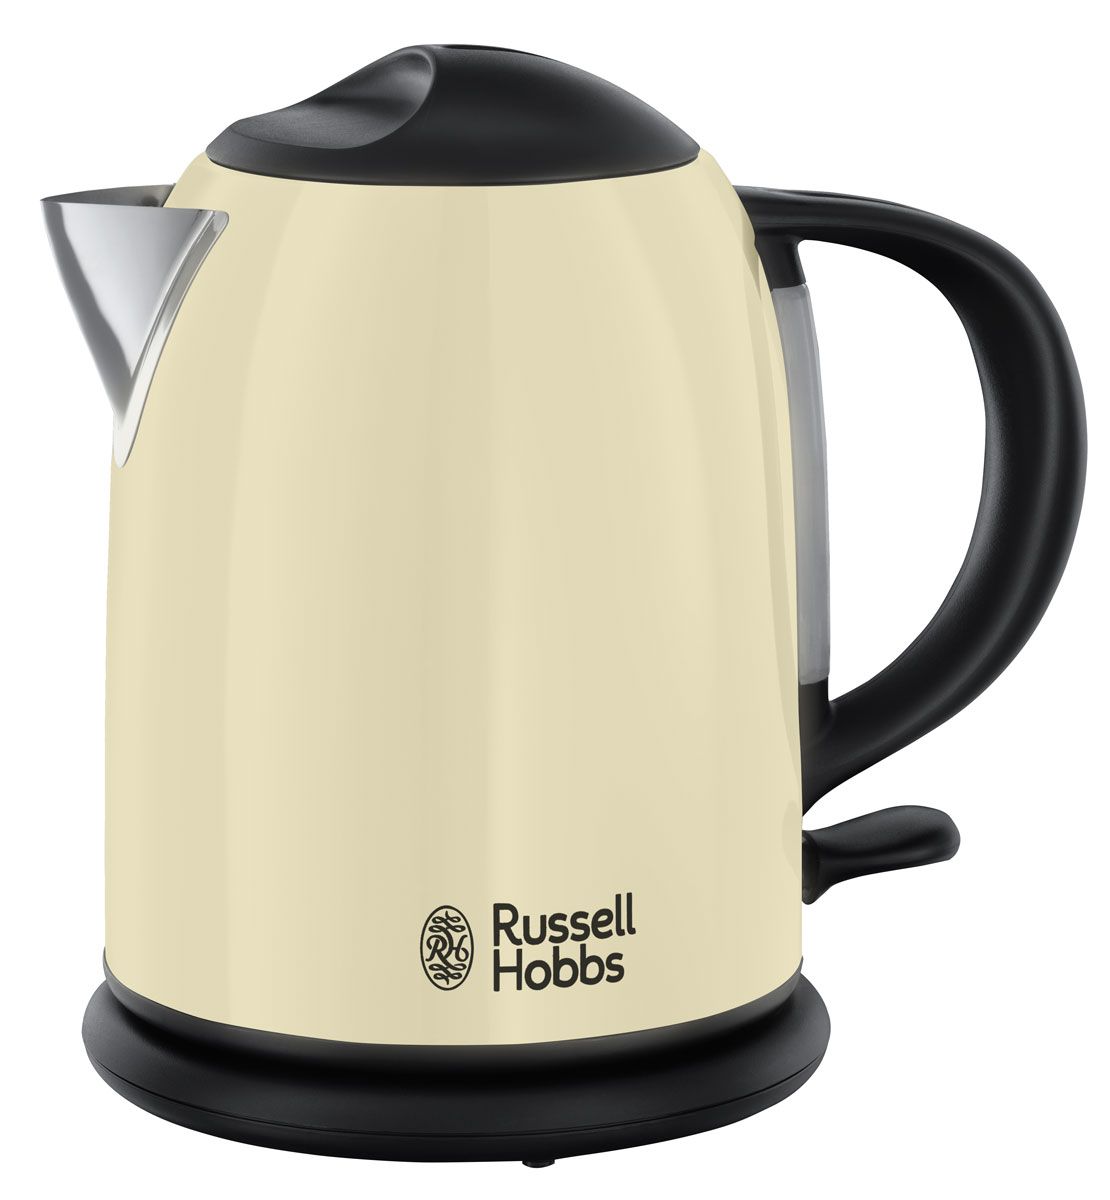   Russell Hobbs Colours Classic, 20194-70, Cream